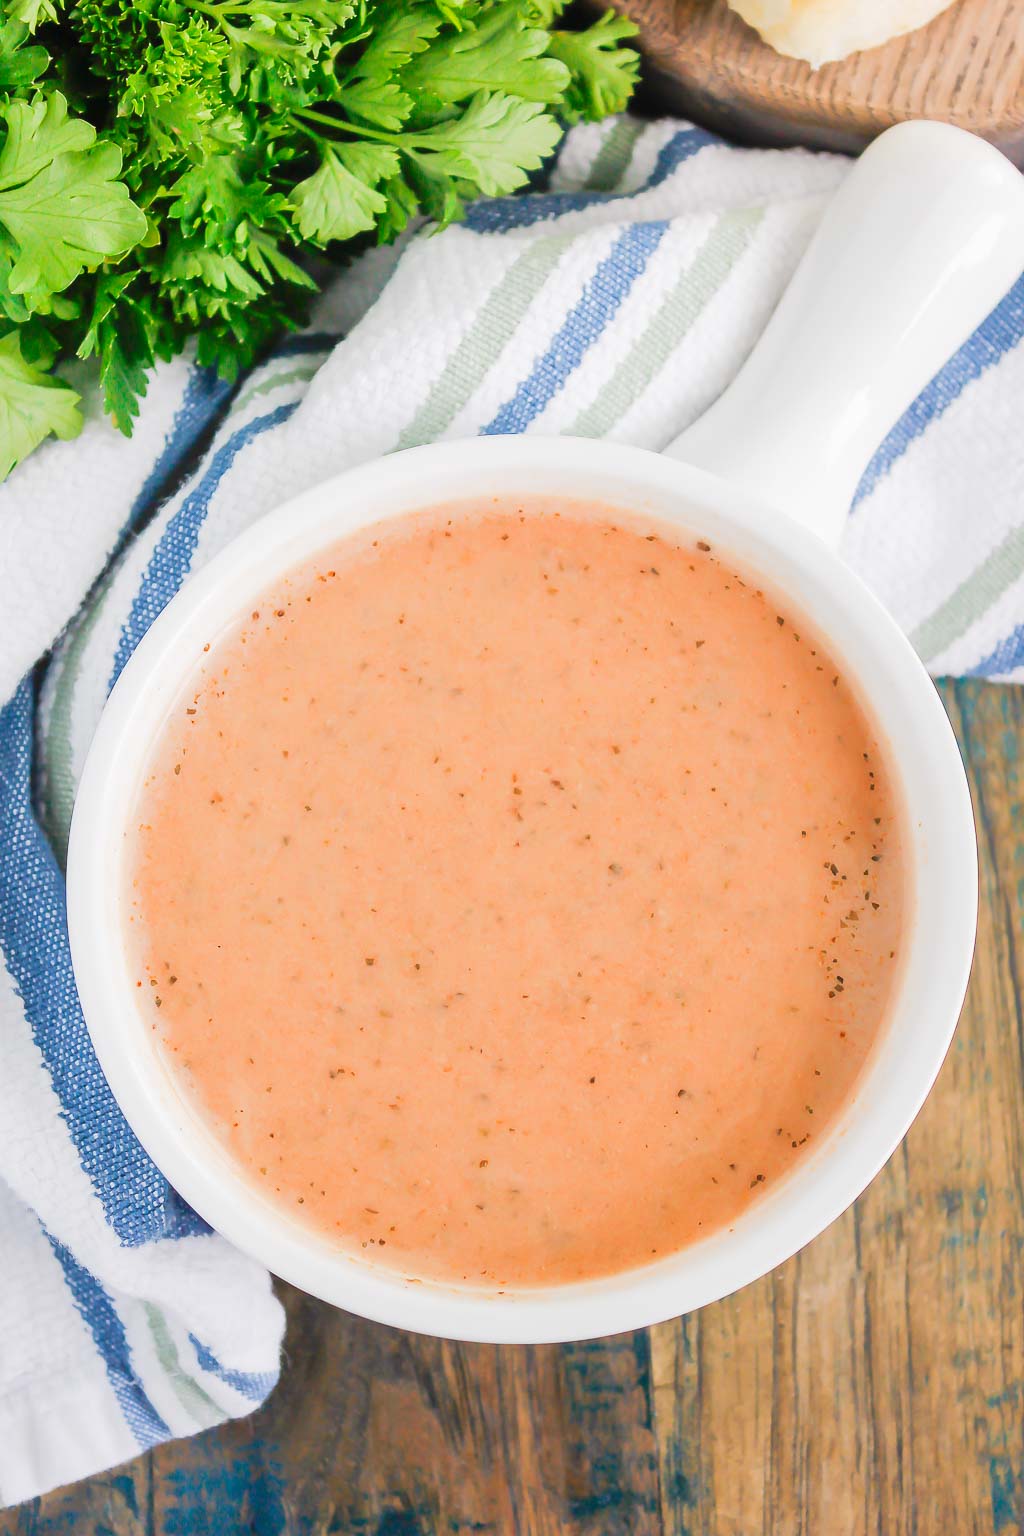 Instant Pot Tomato Basil Soup is an easy recipe that's ready in just 30 minutes. Made entirely in a pressure cooker and with just a few ingredients, this hearty soup is creamy and bursting with flavor. It's perfect to serve when you want a quick and easy comfort dish! #soup #tomatosoup #tomatosouprecipe #instantpotrecipe #instantpotsoup #instantpottomatosoup #creamytomatosoup #tomatobasilsoup #souprecipe #dinnerrecipe #easysouprecipe